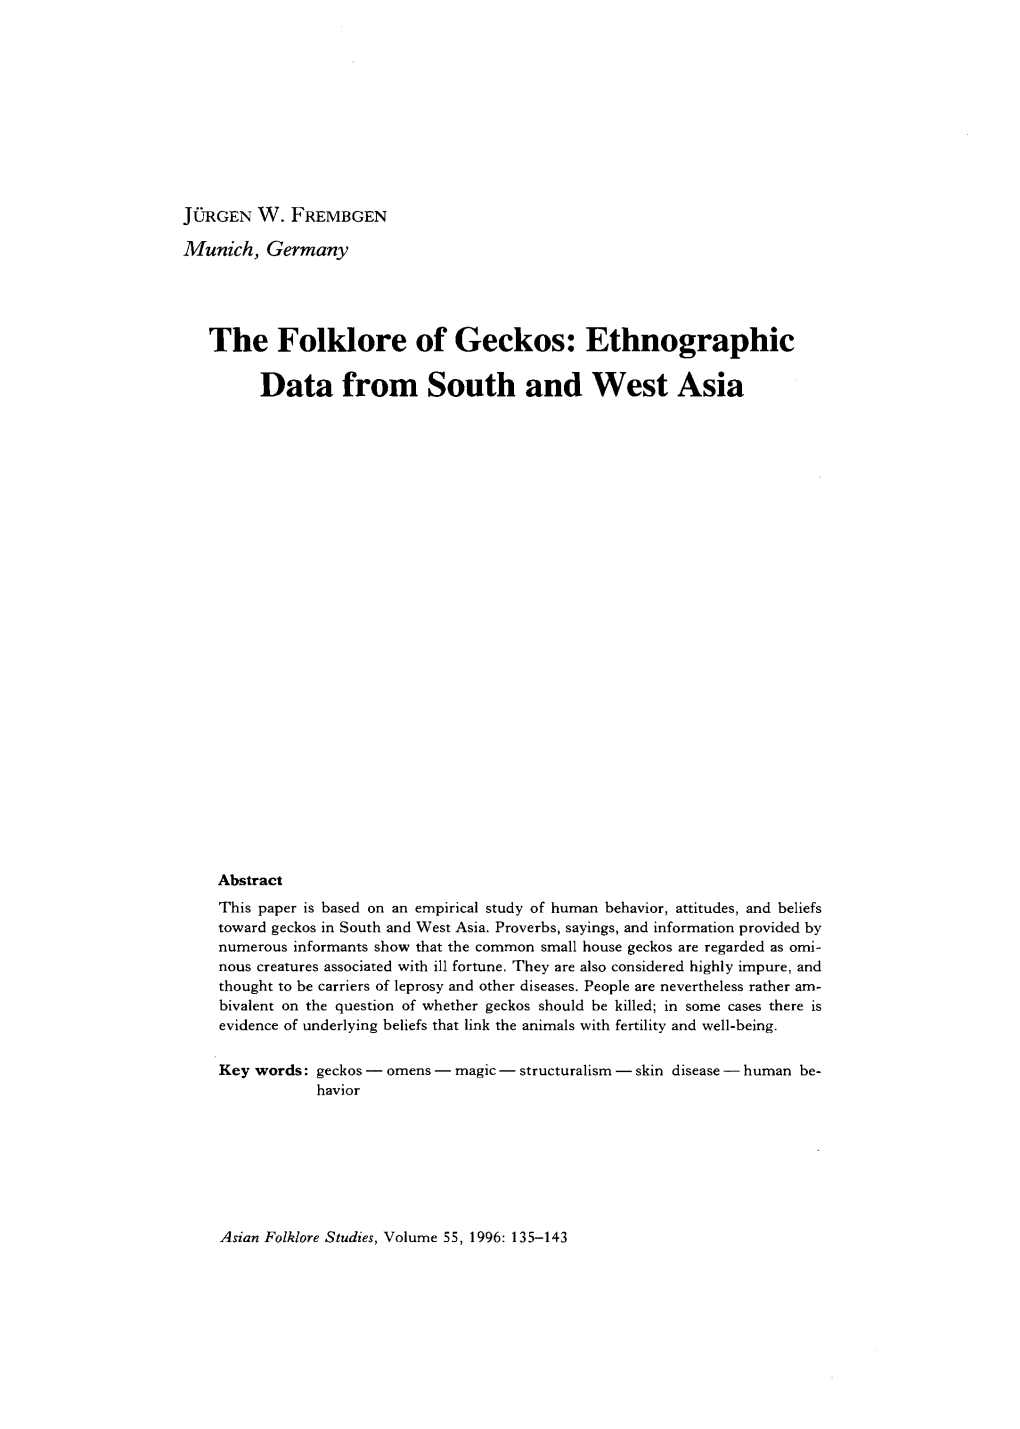 The Folklore of Geckos: Ethnographic Data from South and West Asia